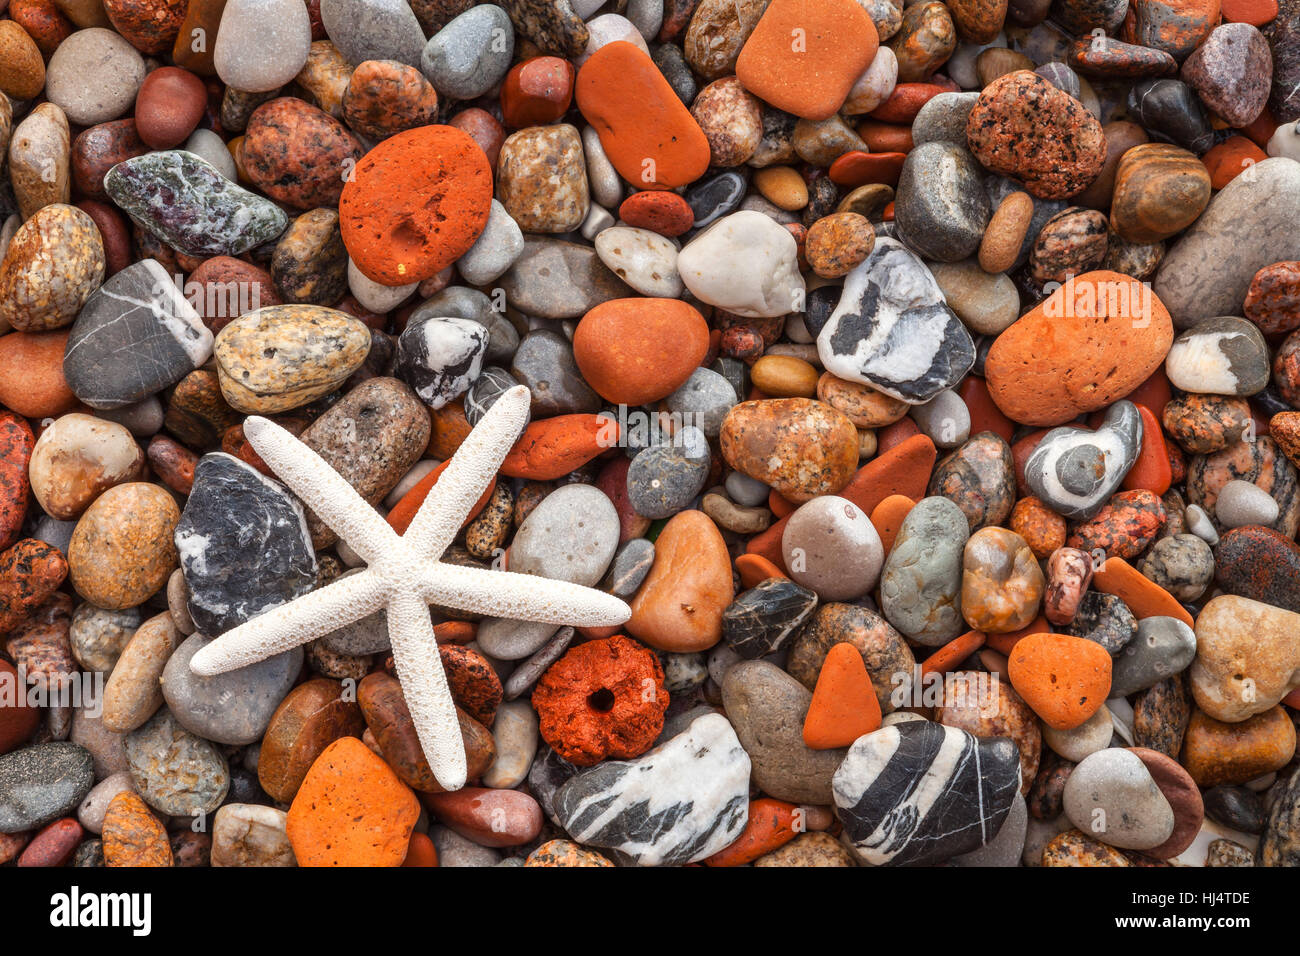 Background image of colorful beach stones and starfish Stock Photo